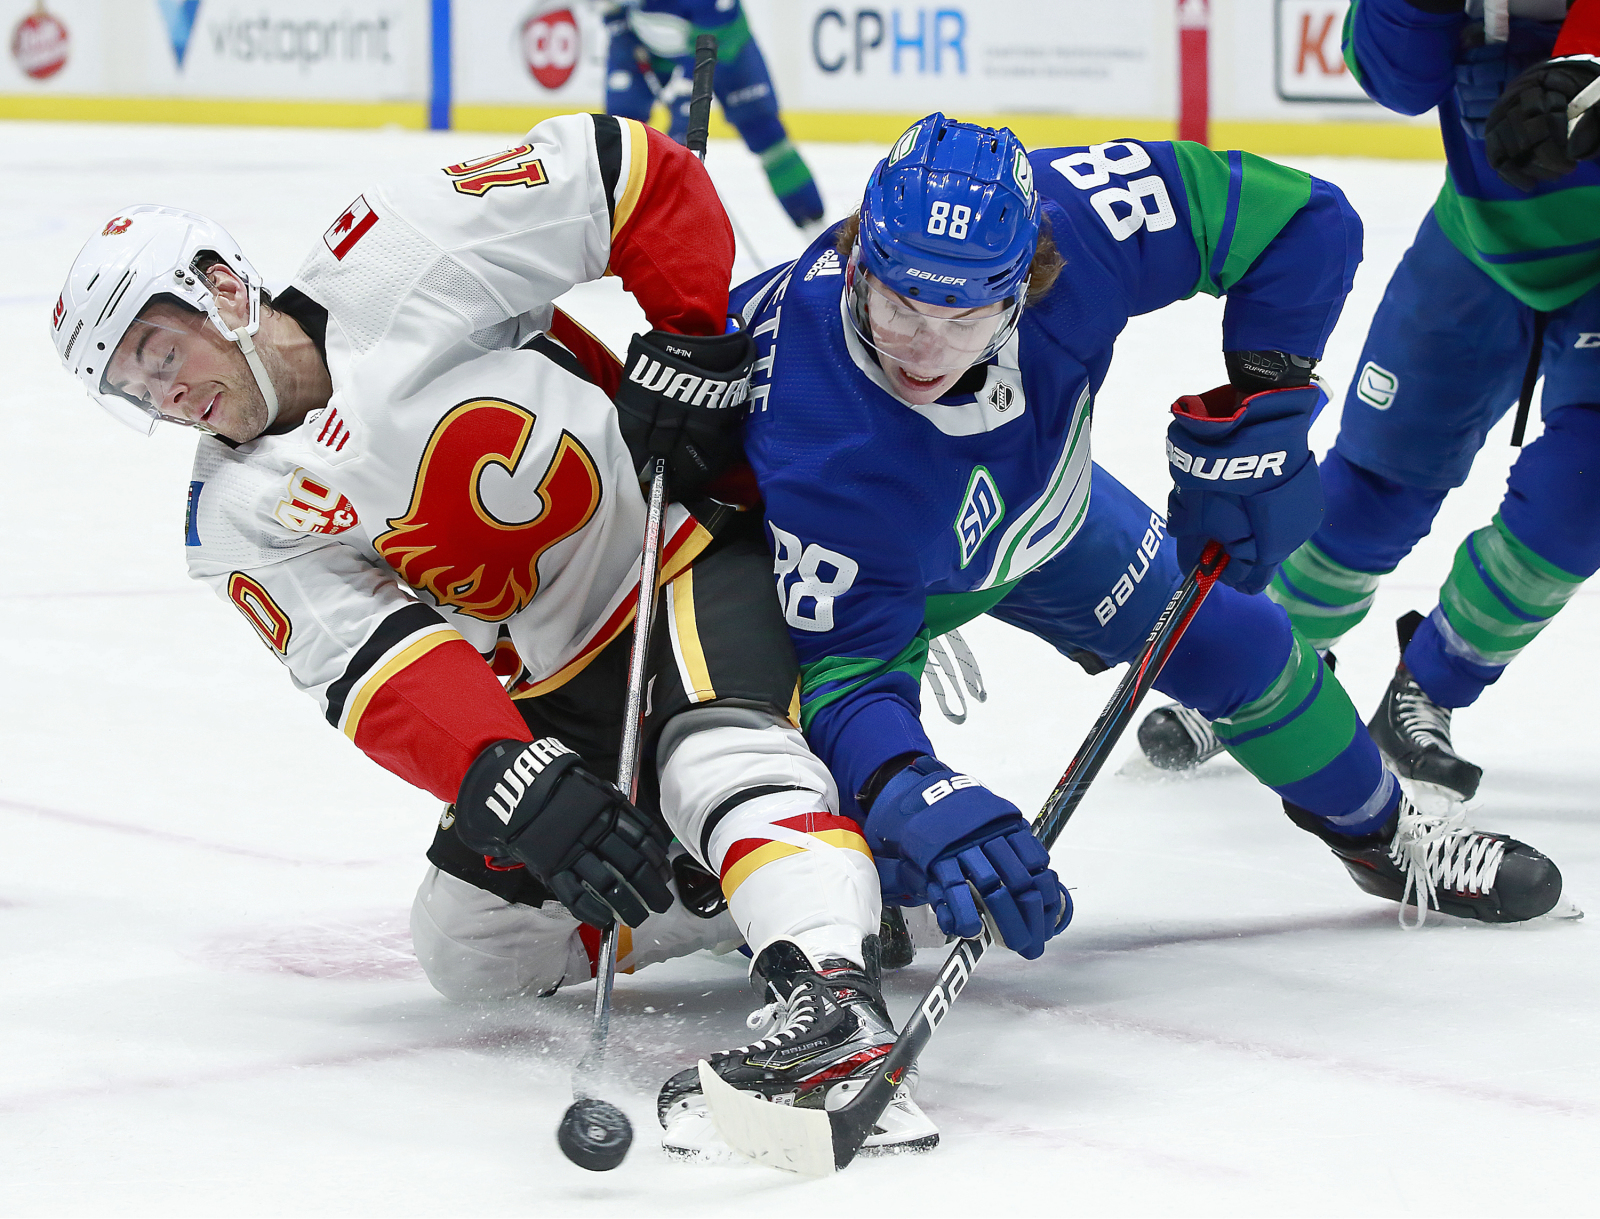 Vancouver Canucks: 3 takeaways from 2-0 loss to New Jersey